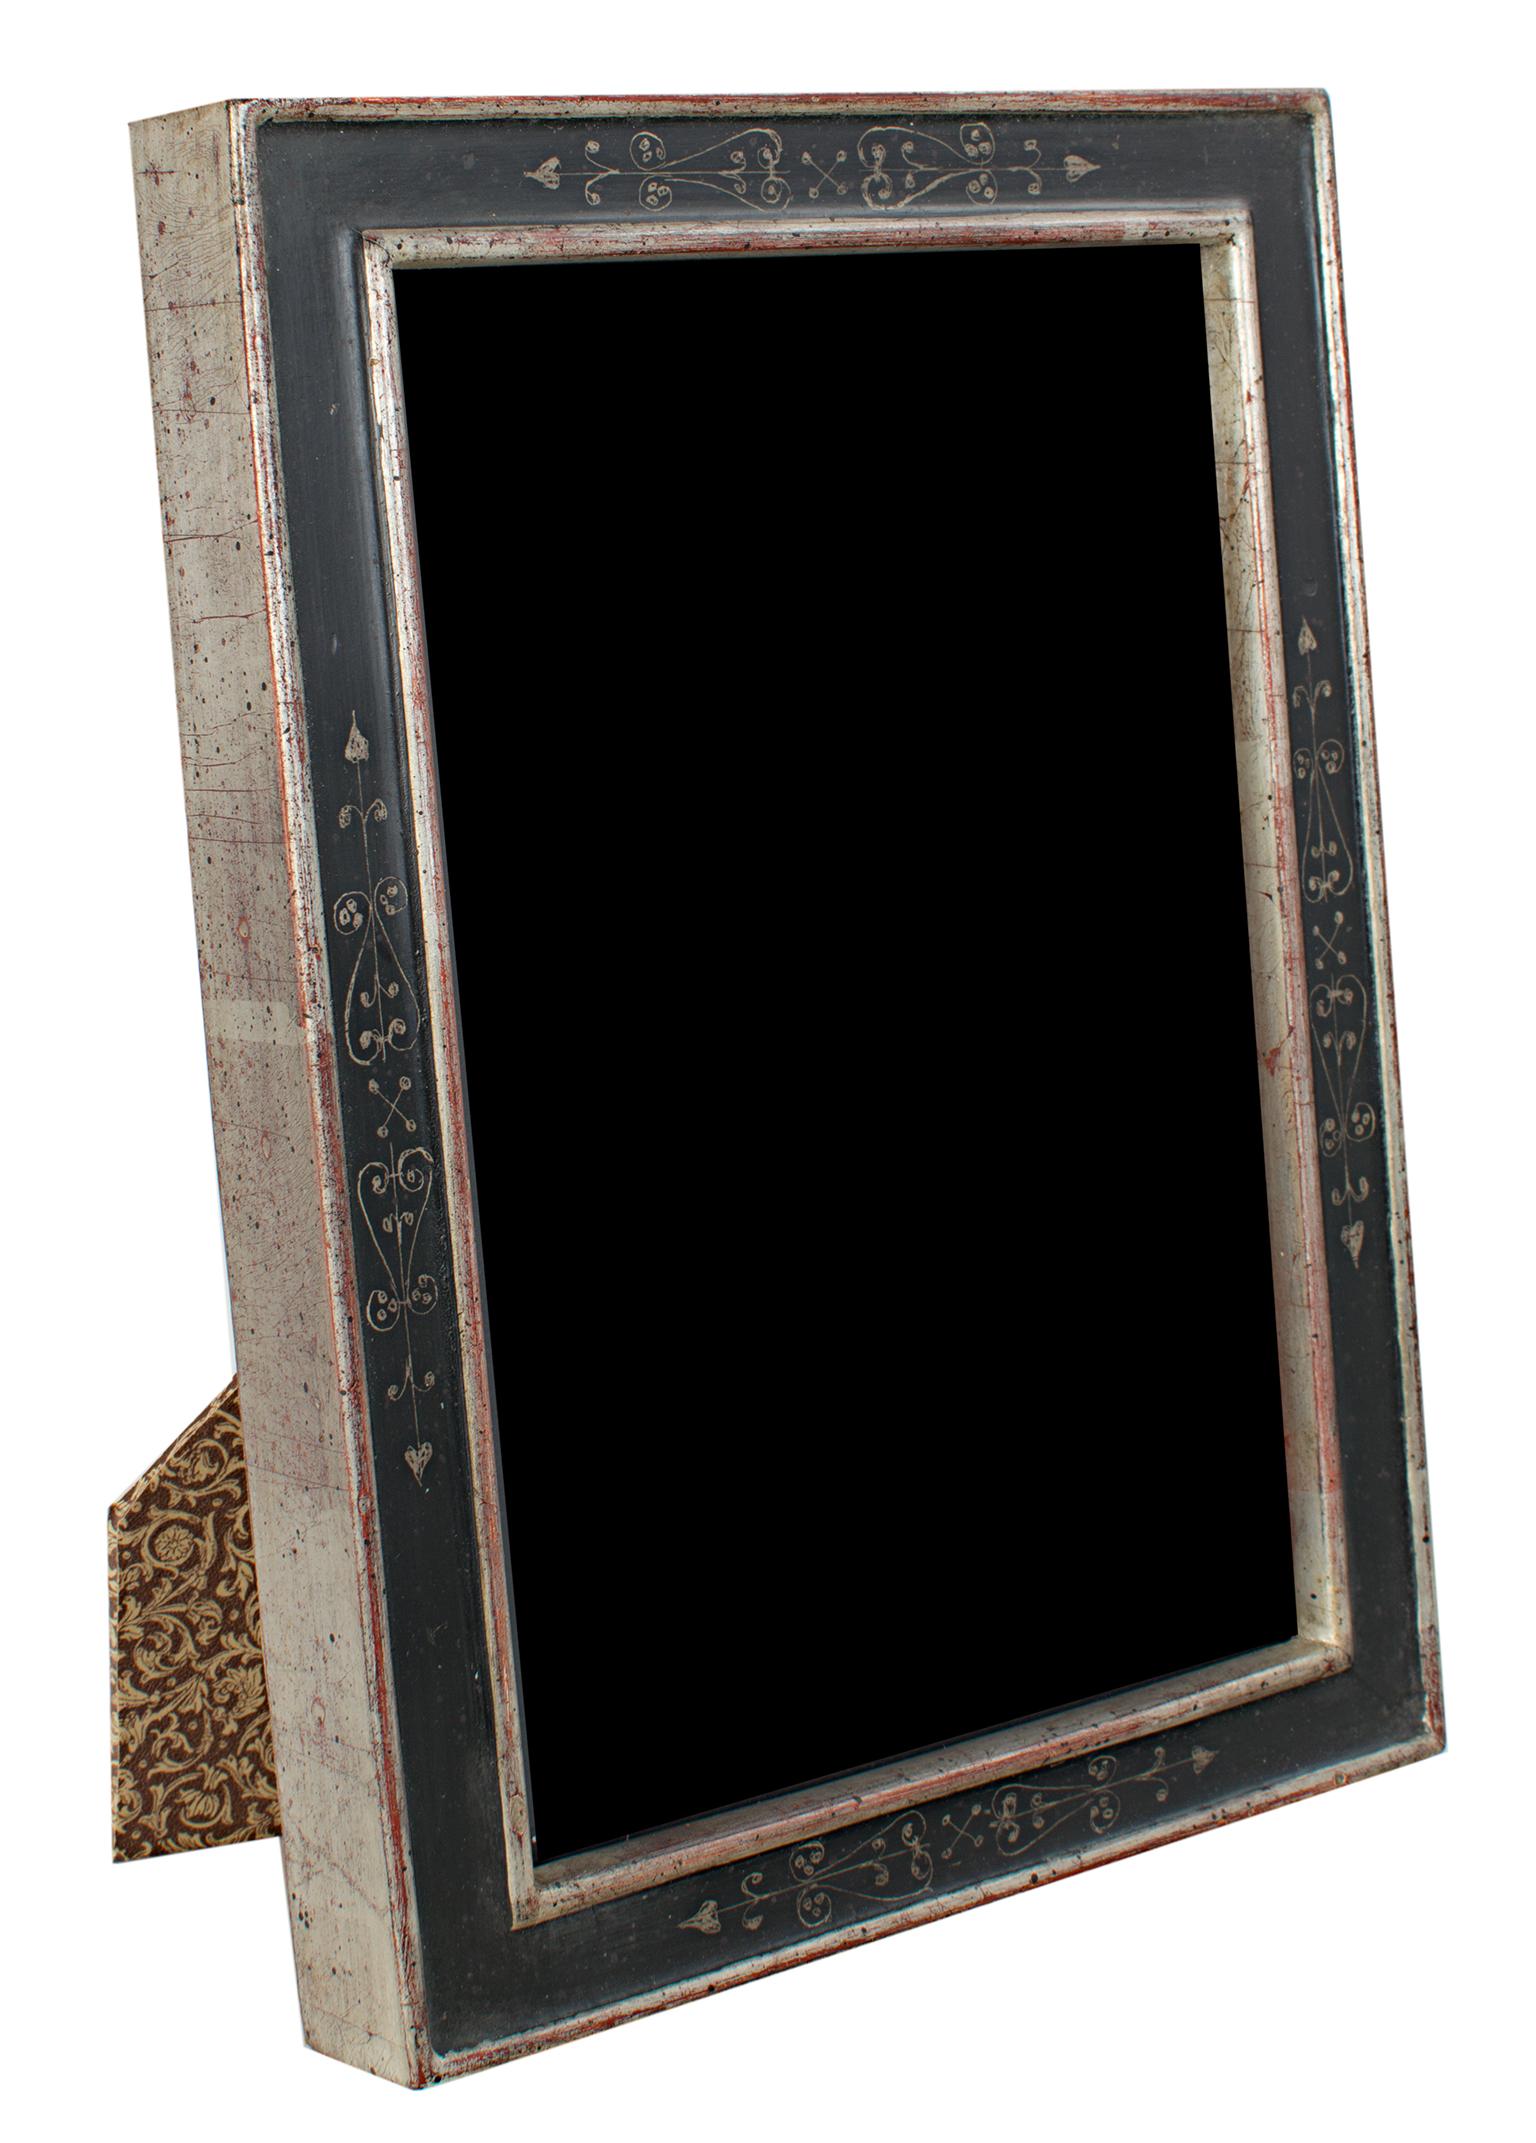 "Romanian Handmade Photo Frame, " 12K White Gold Leaf & Wood 5 x 7 in Frame - Art by Unknown